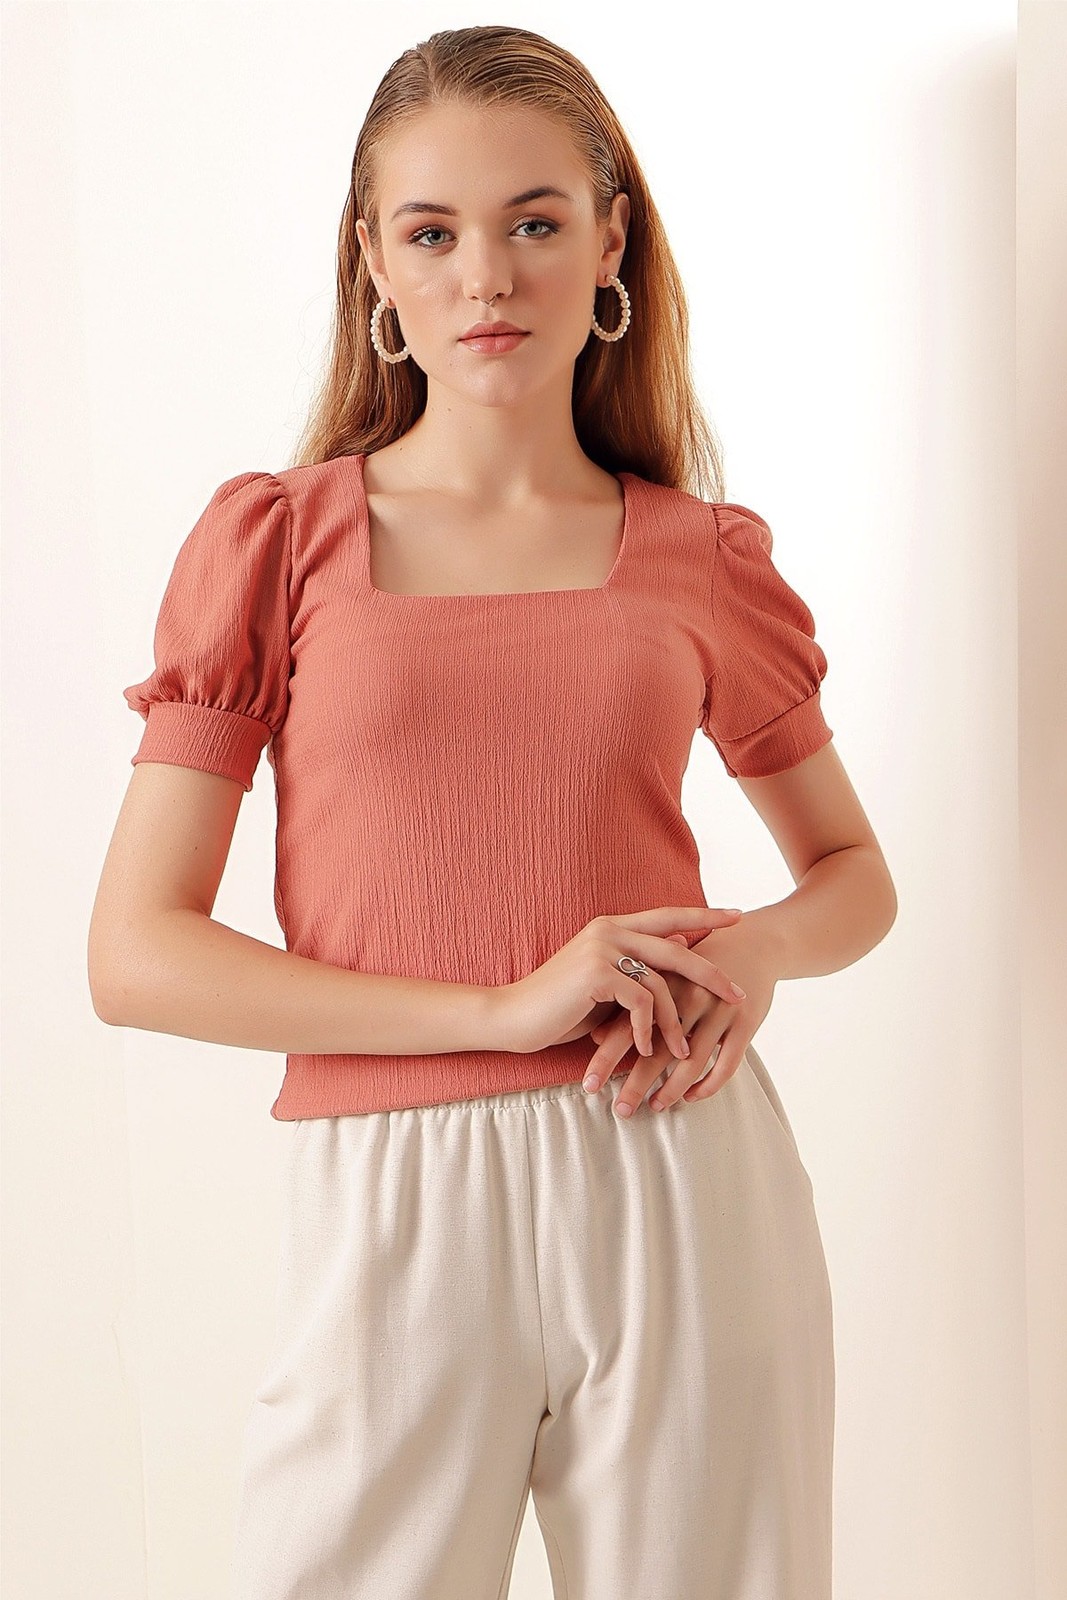 Bigdart 0409 Square Collar Knitted Blouse - Dried Rose